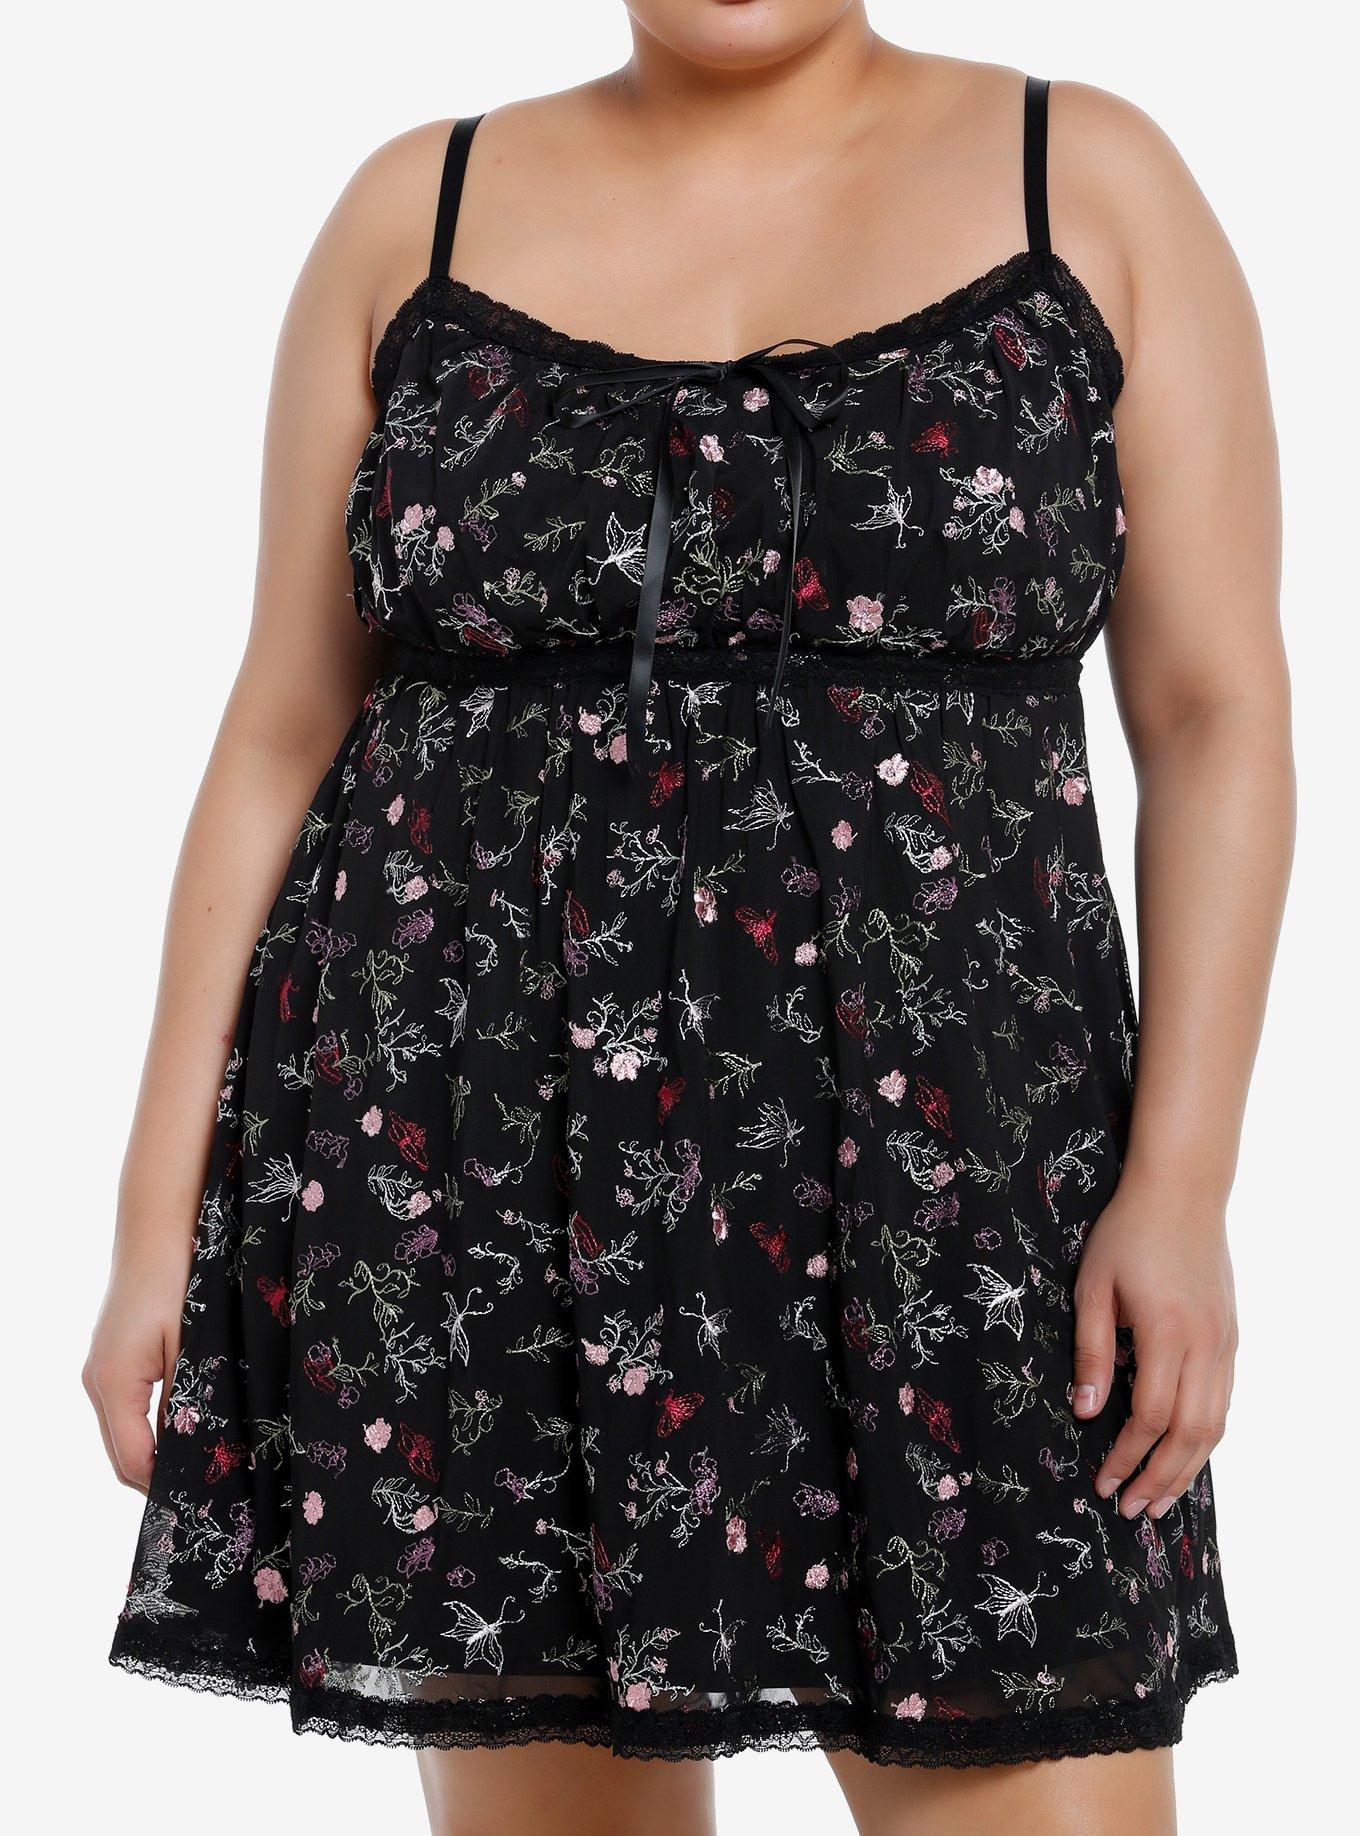 Embroidered Cami Dress Plus - Black/Charcoal